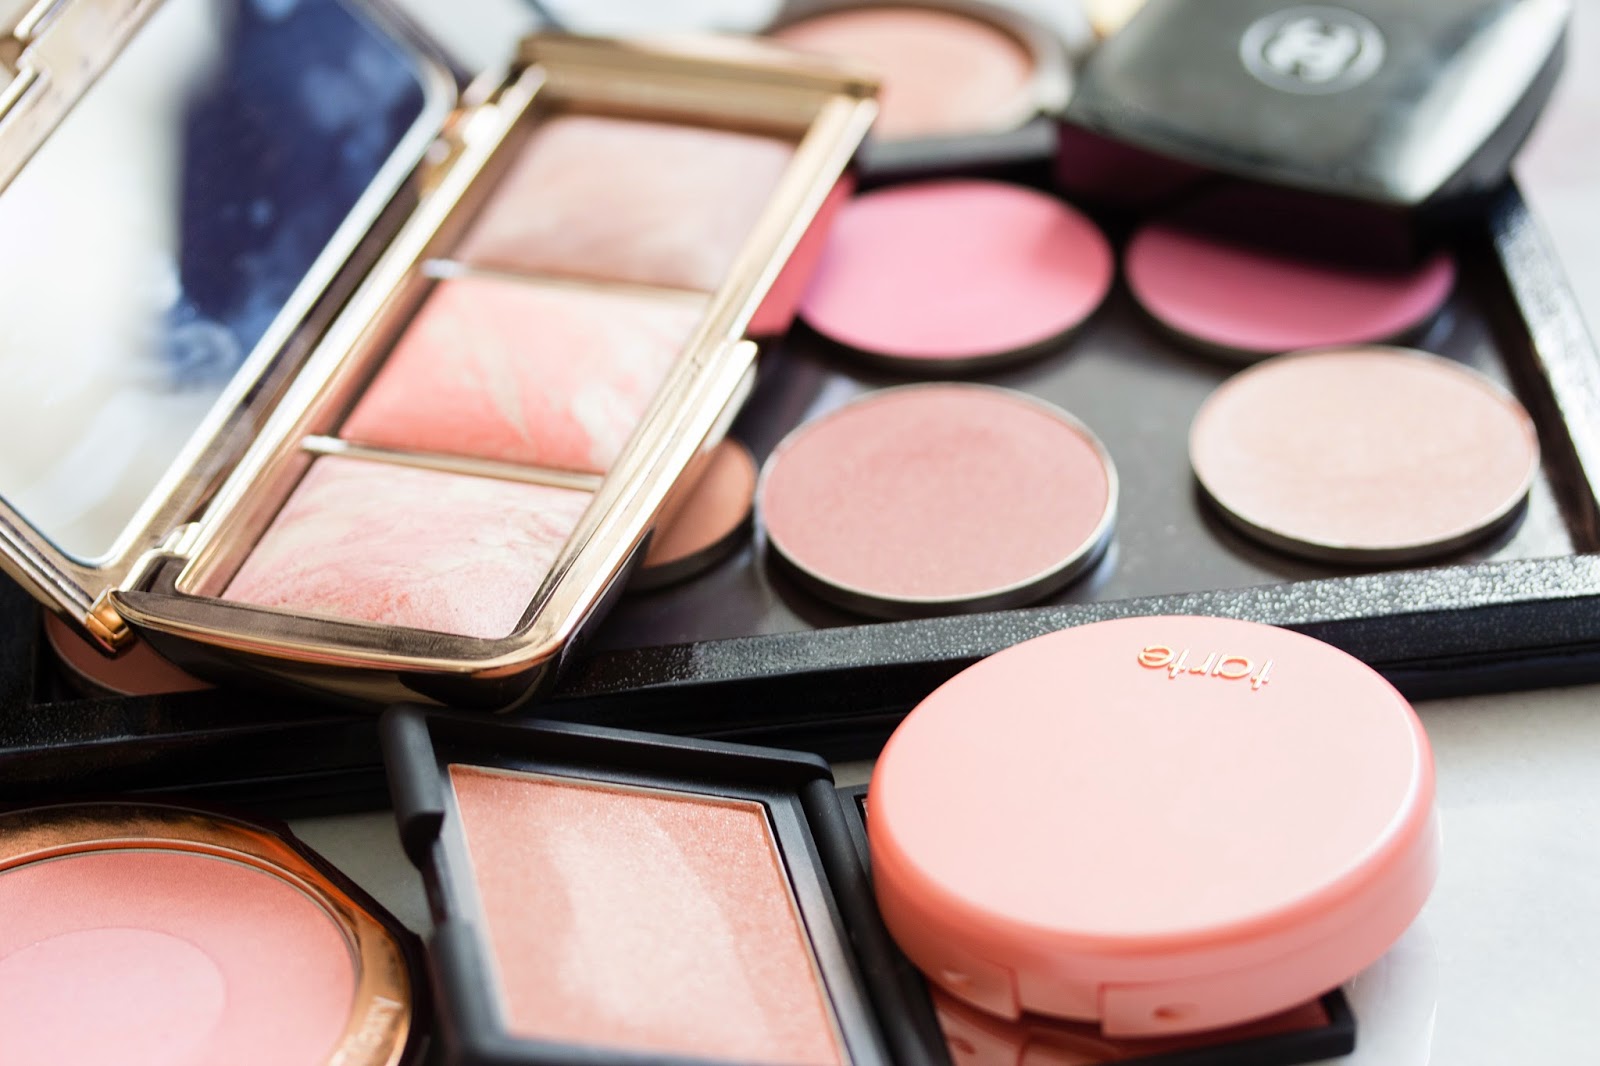 Dress Yourself Happy By Serein: The Best of 2014 Blushes